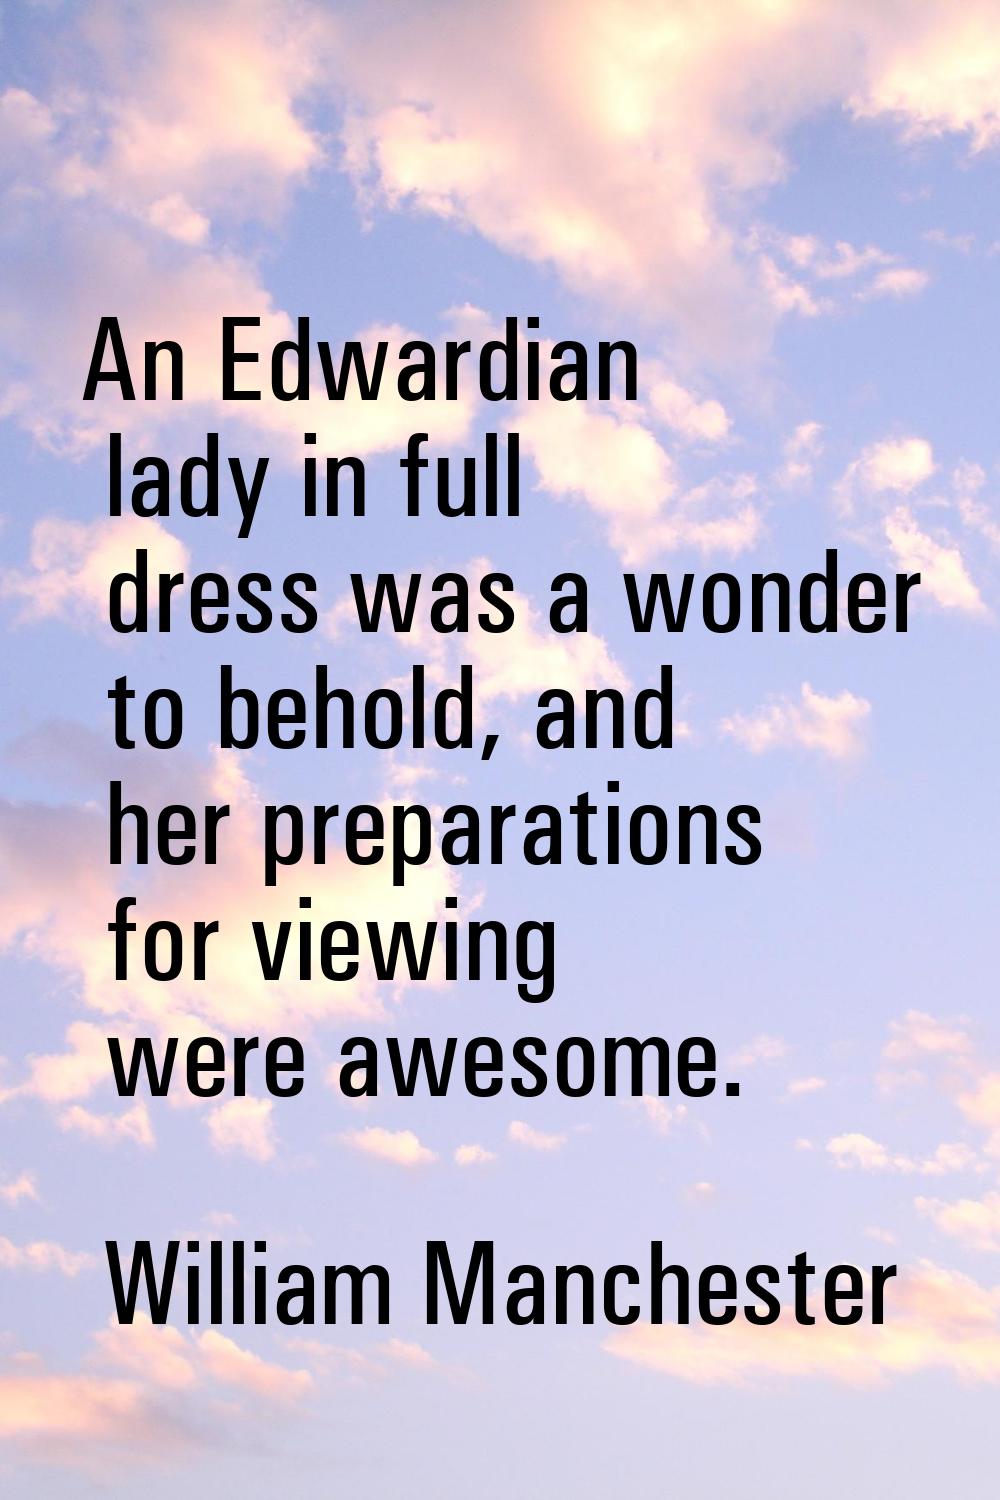 An Edwardian lady in full dress was a wonder to behold, and her preparations for viewing were aweso